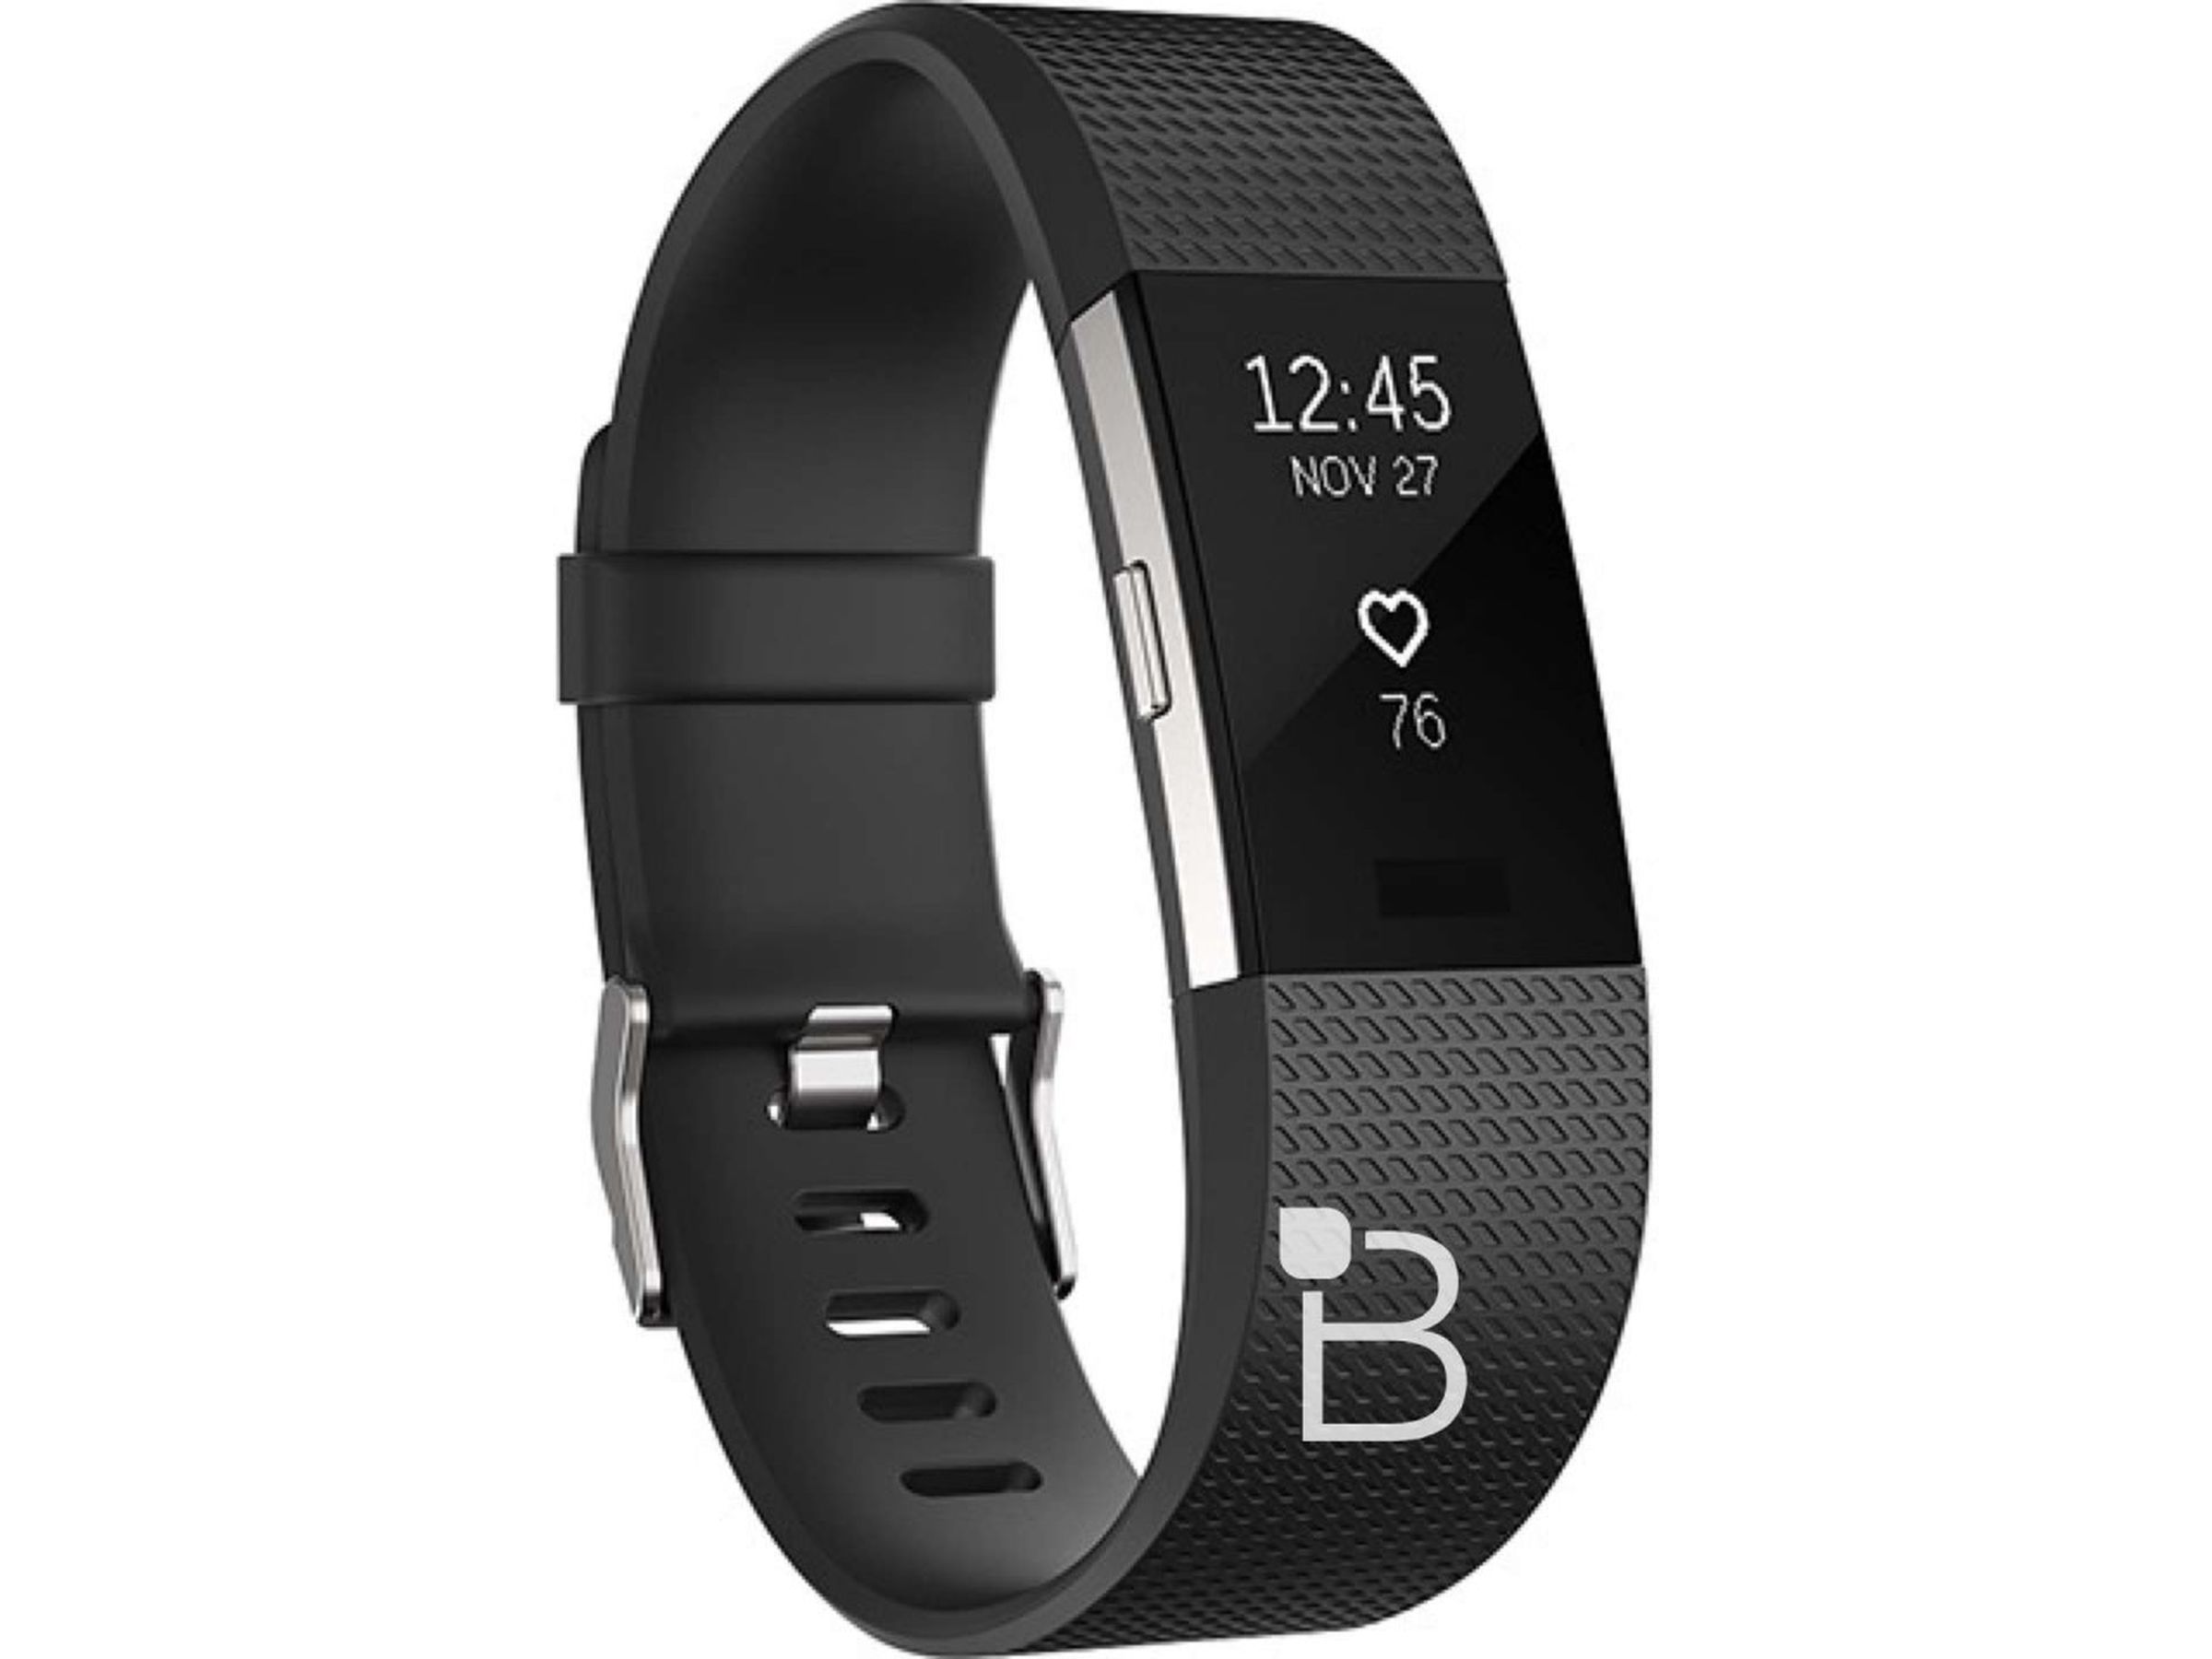 These might be new Fitbit products